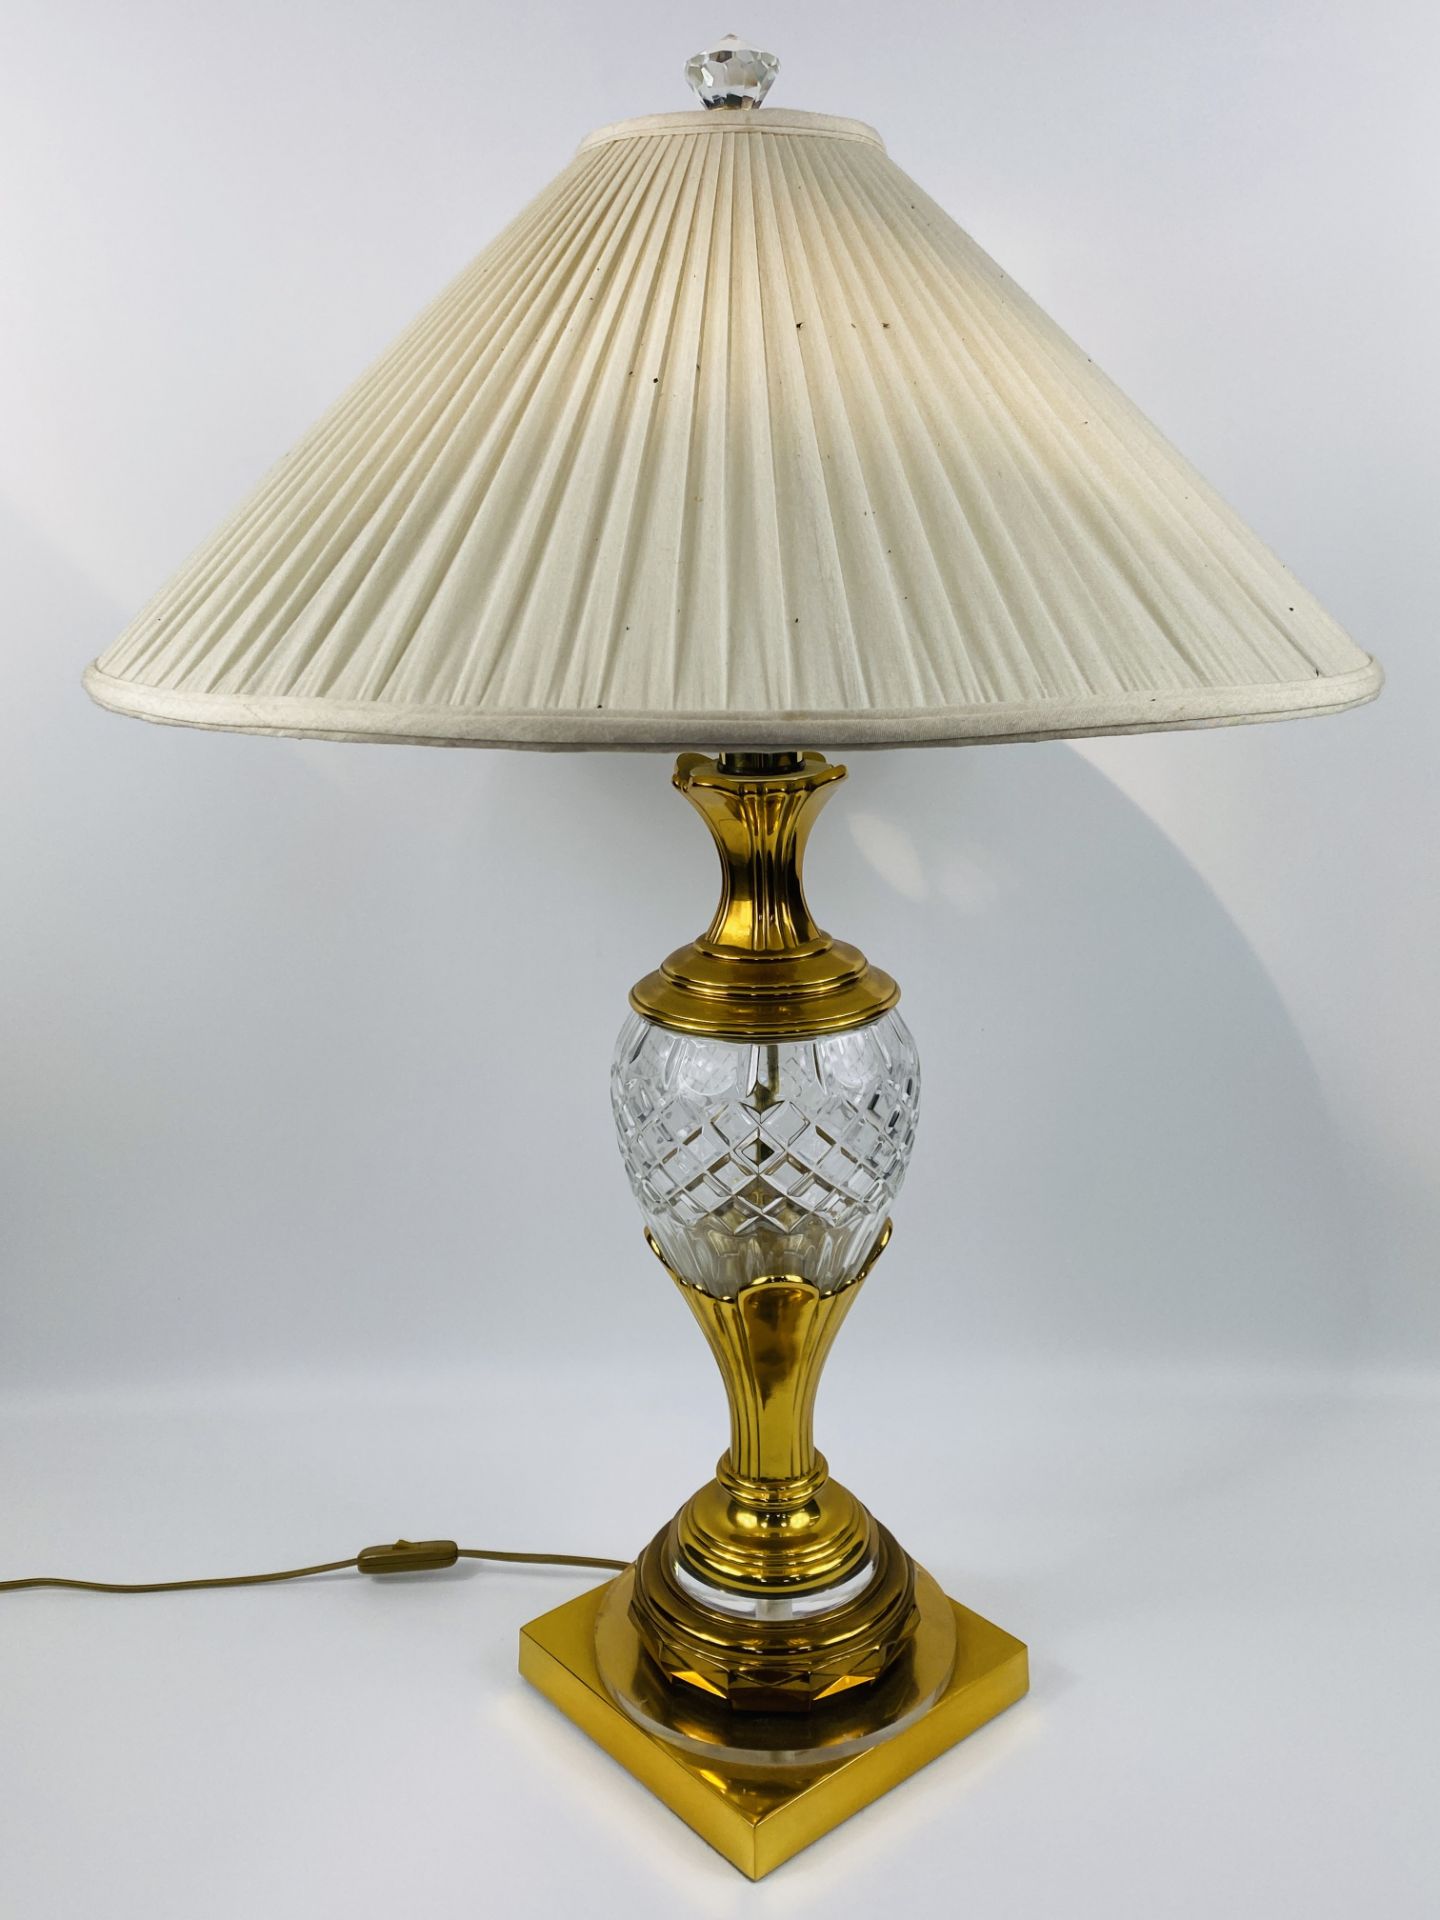 Pair of glass table lamps - Image 5 of 5